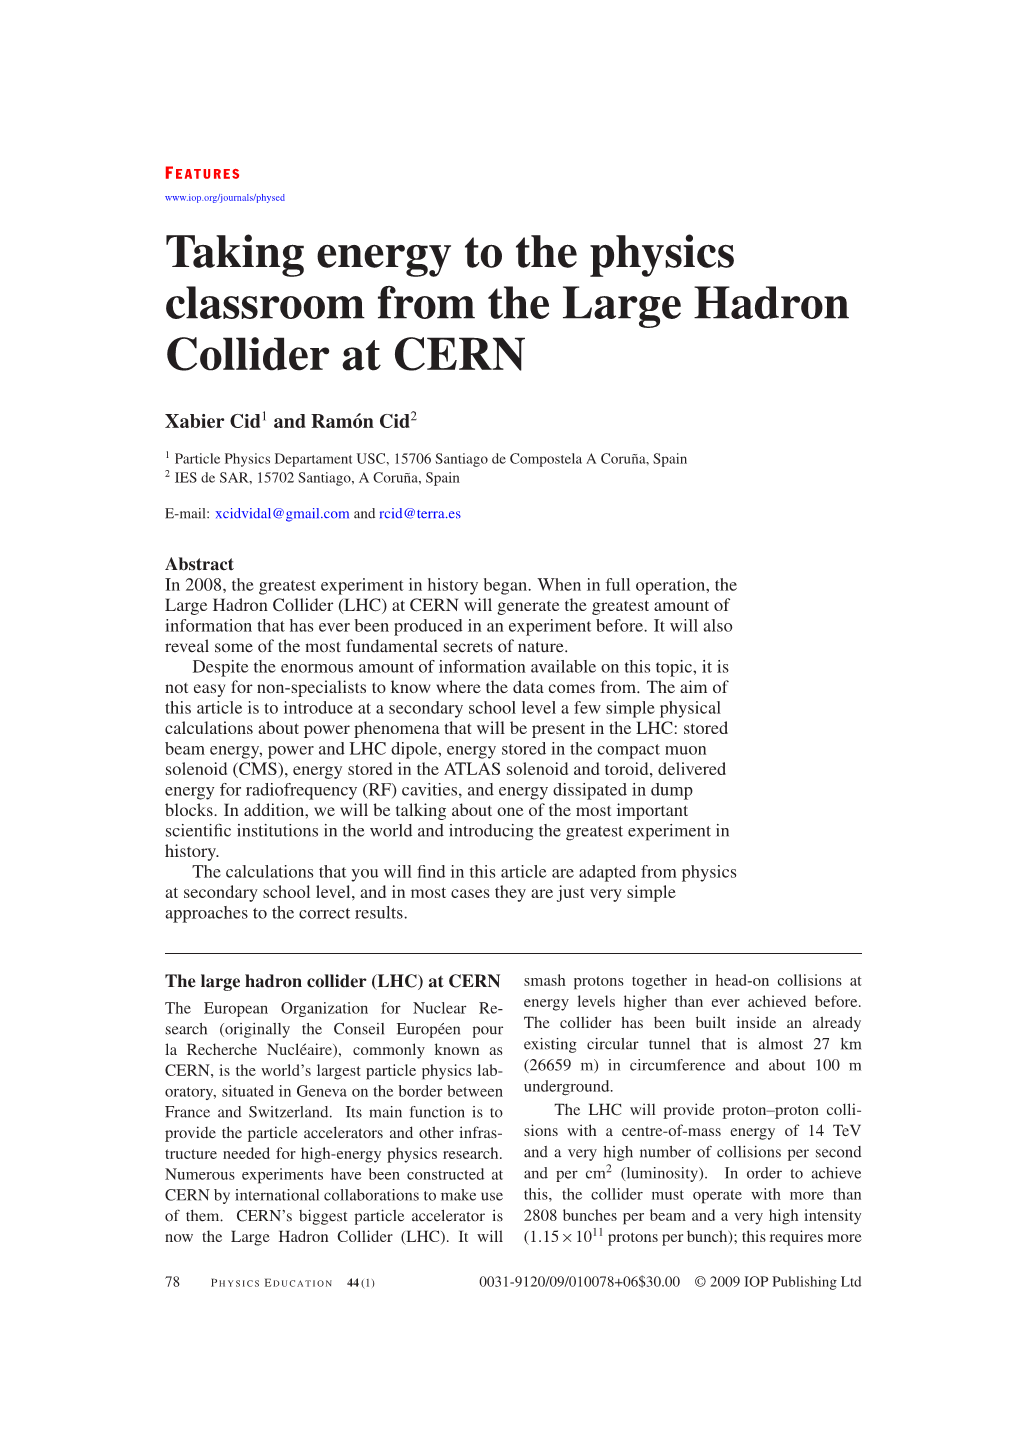 Taking Energy to the Physics Classroom from the Large Hadron Collider at CERN